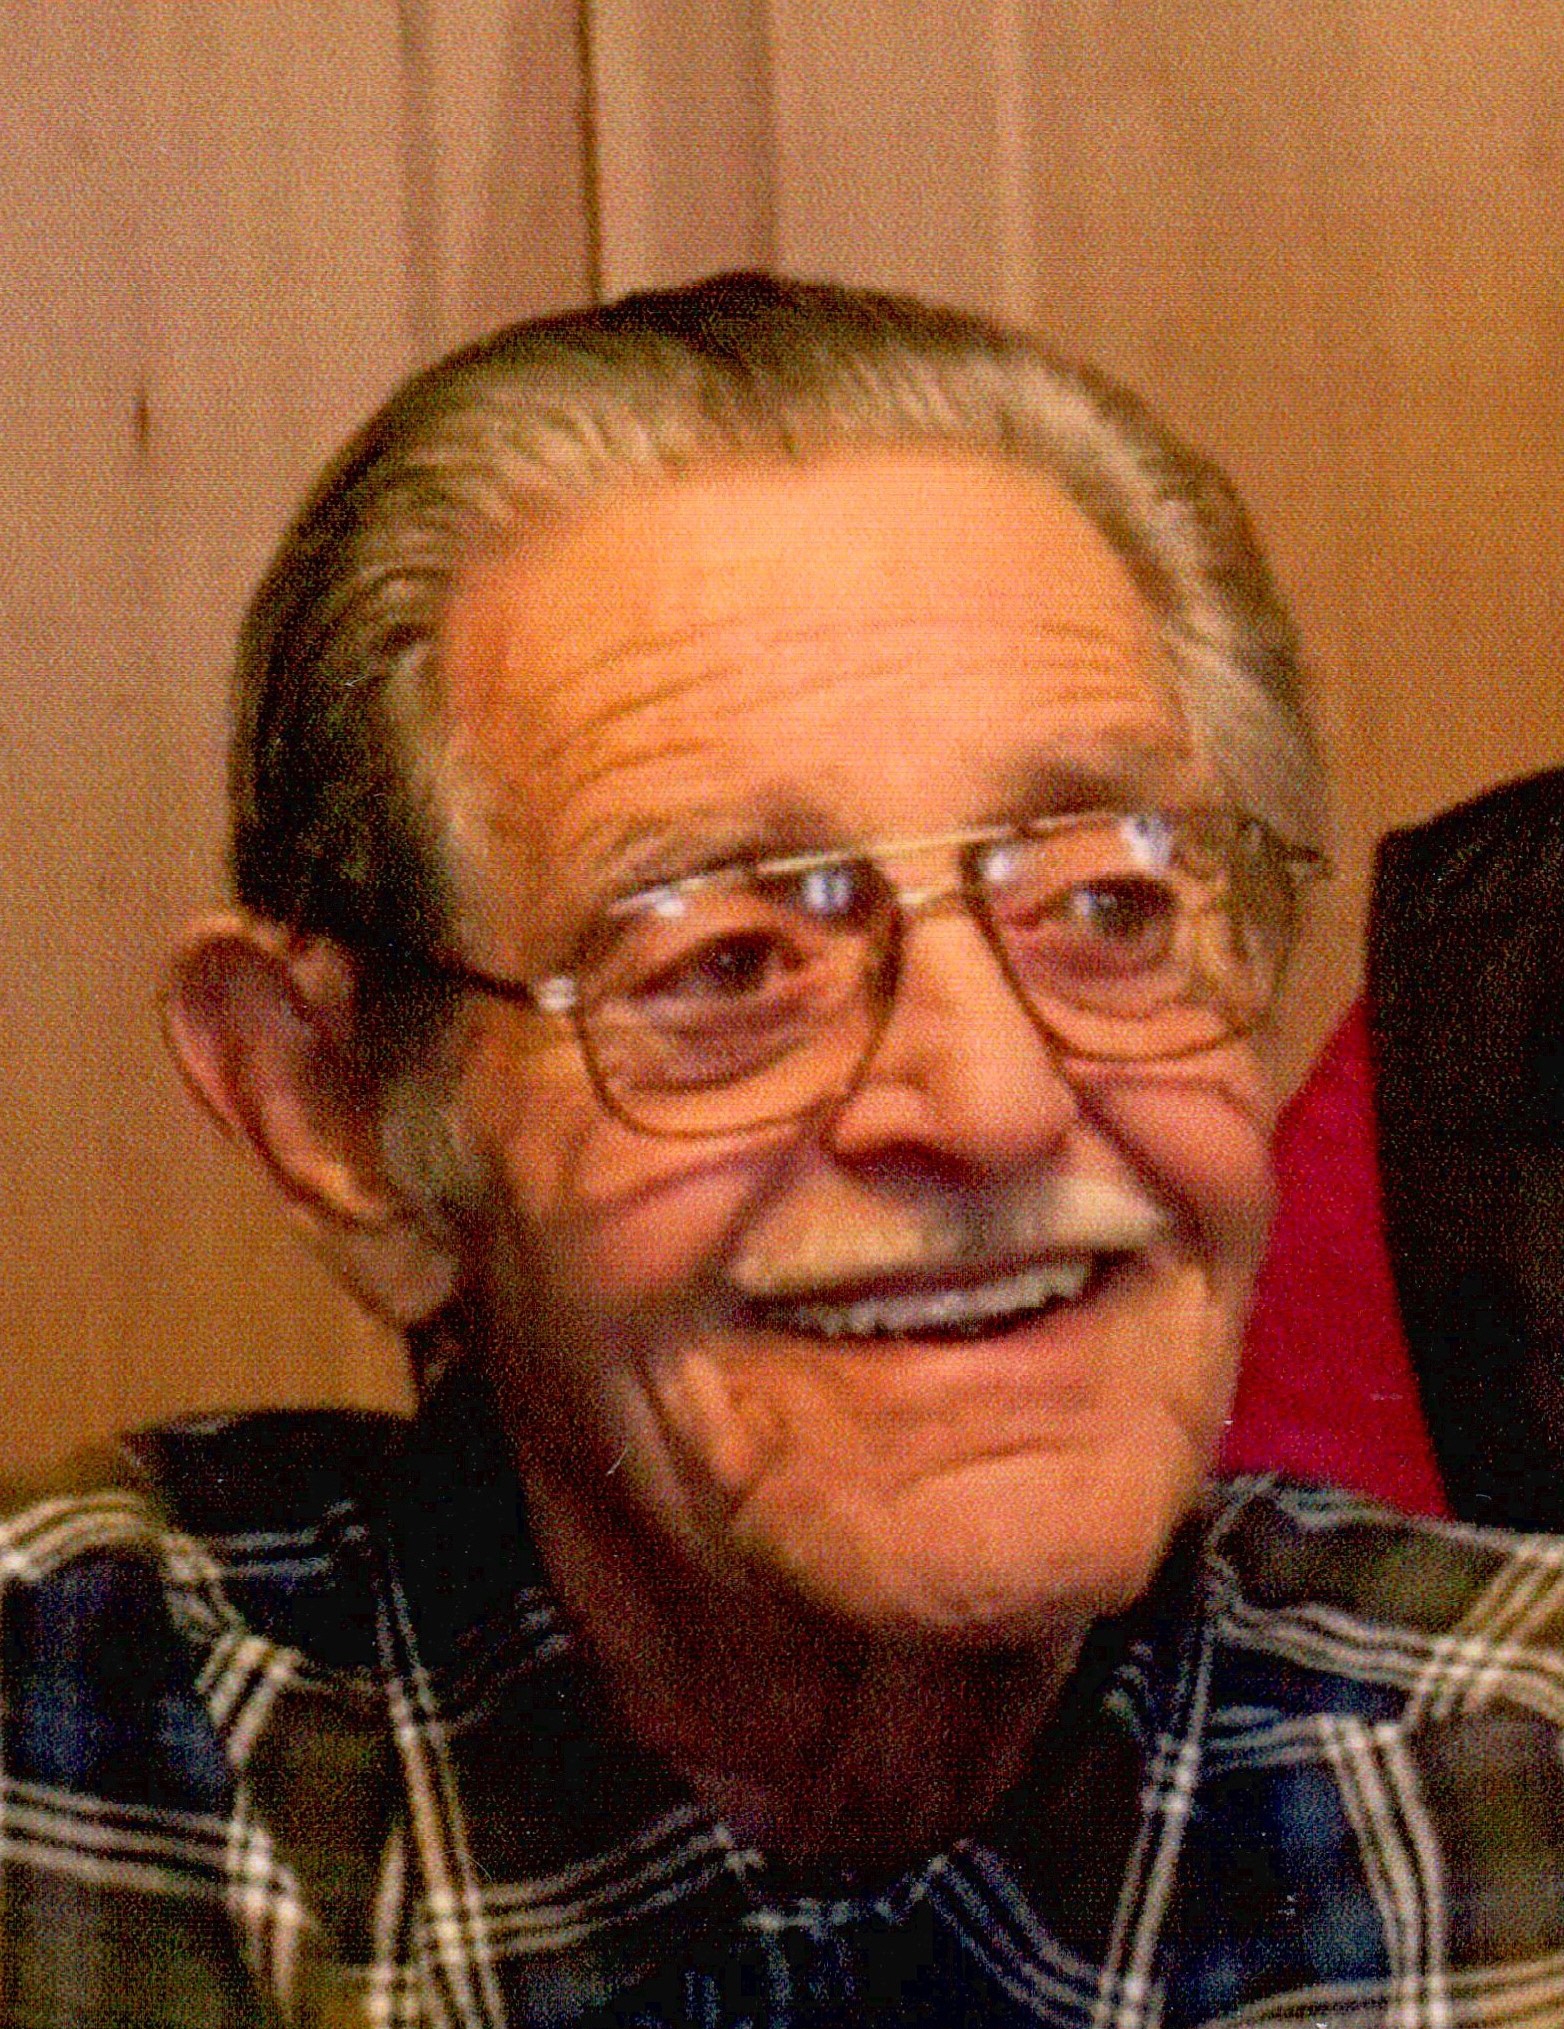 Obituary information for Kendall M Perrou, Sr.